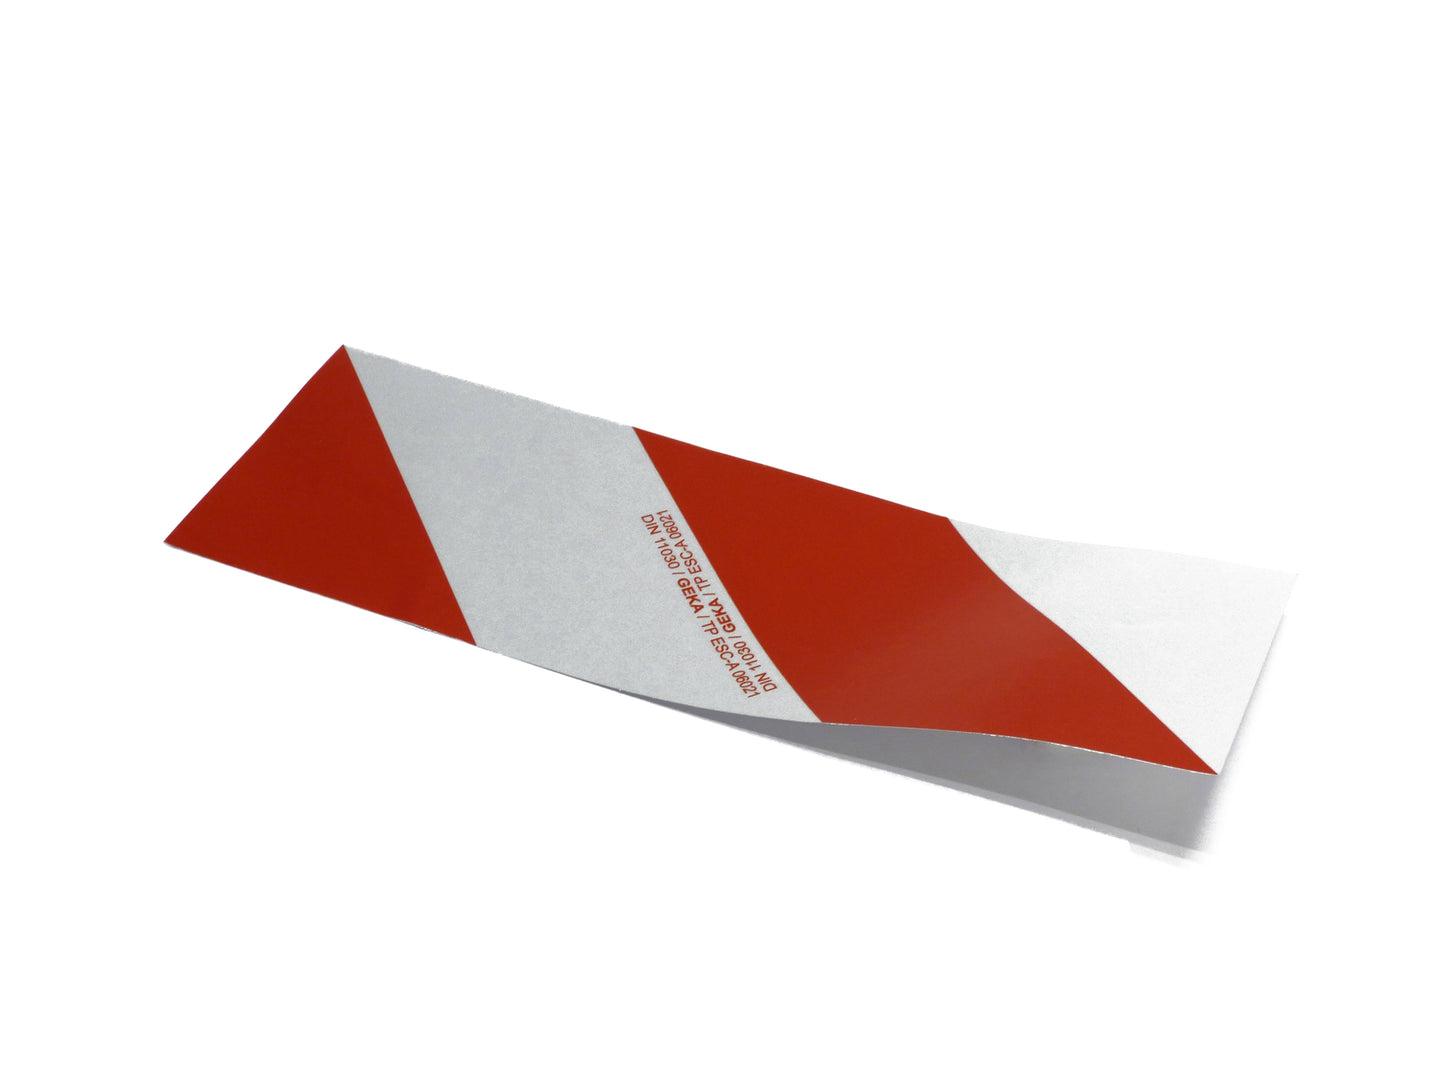 Reflective foil self adhesive 423mm x 141mm